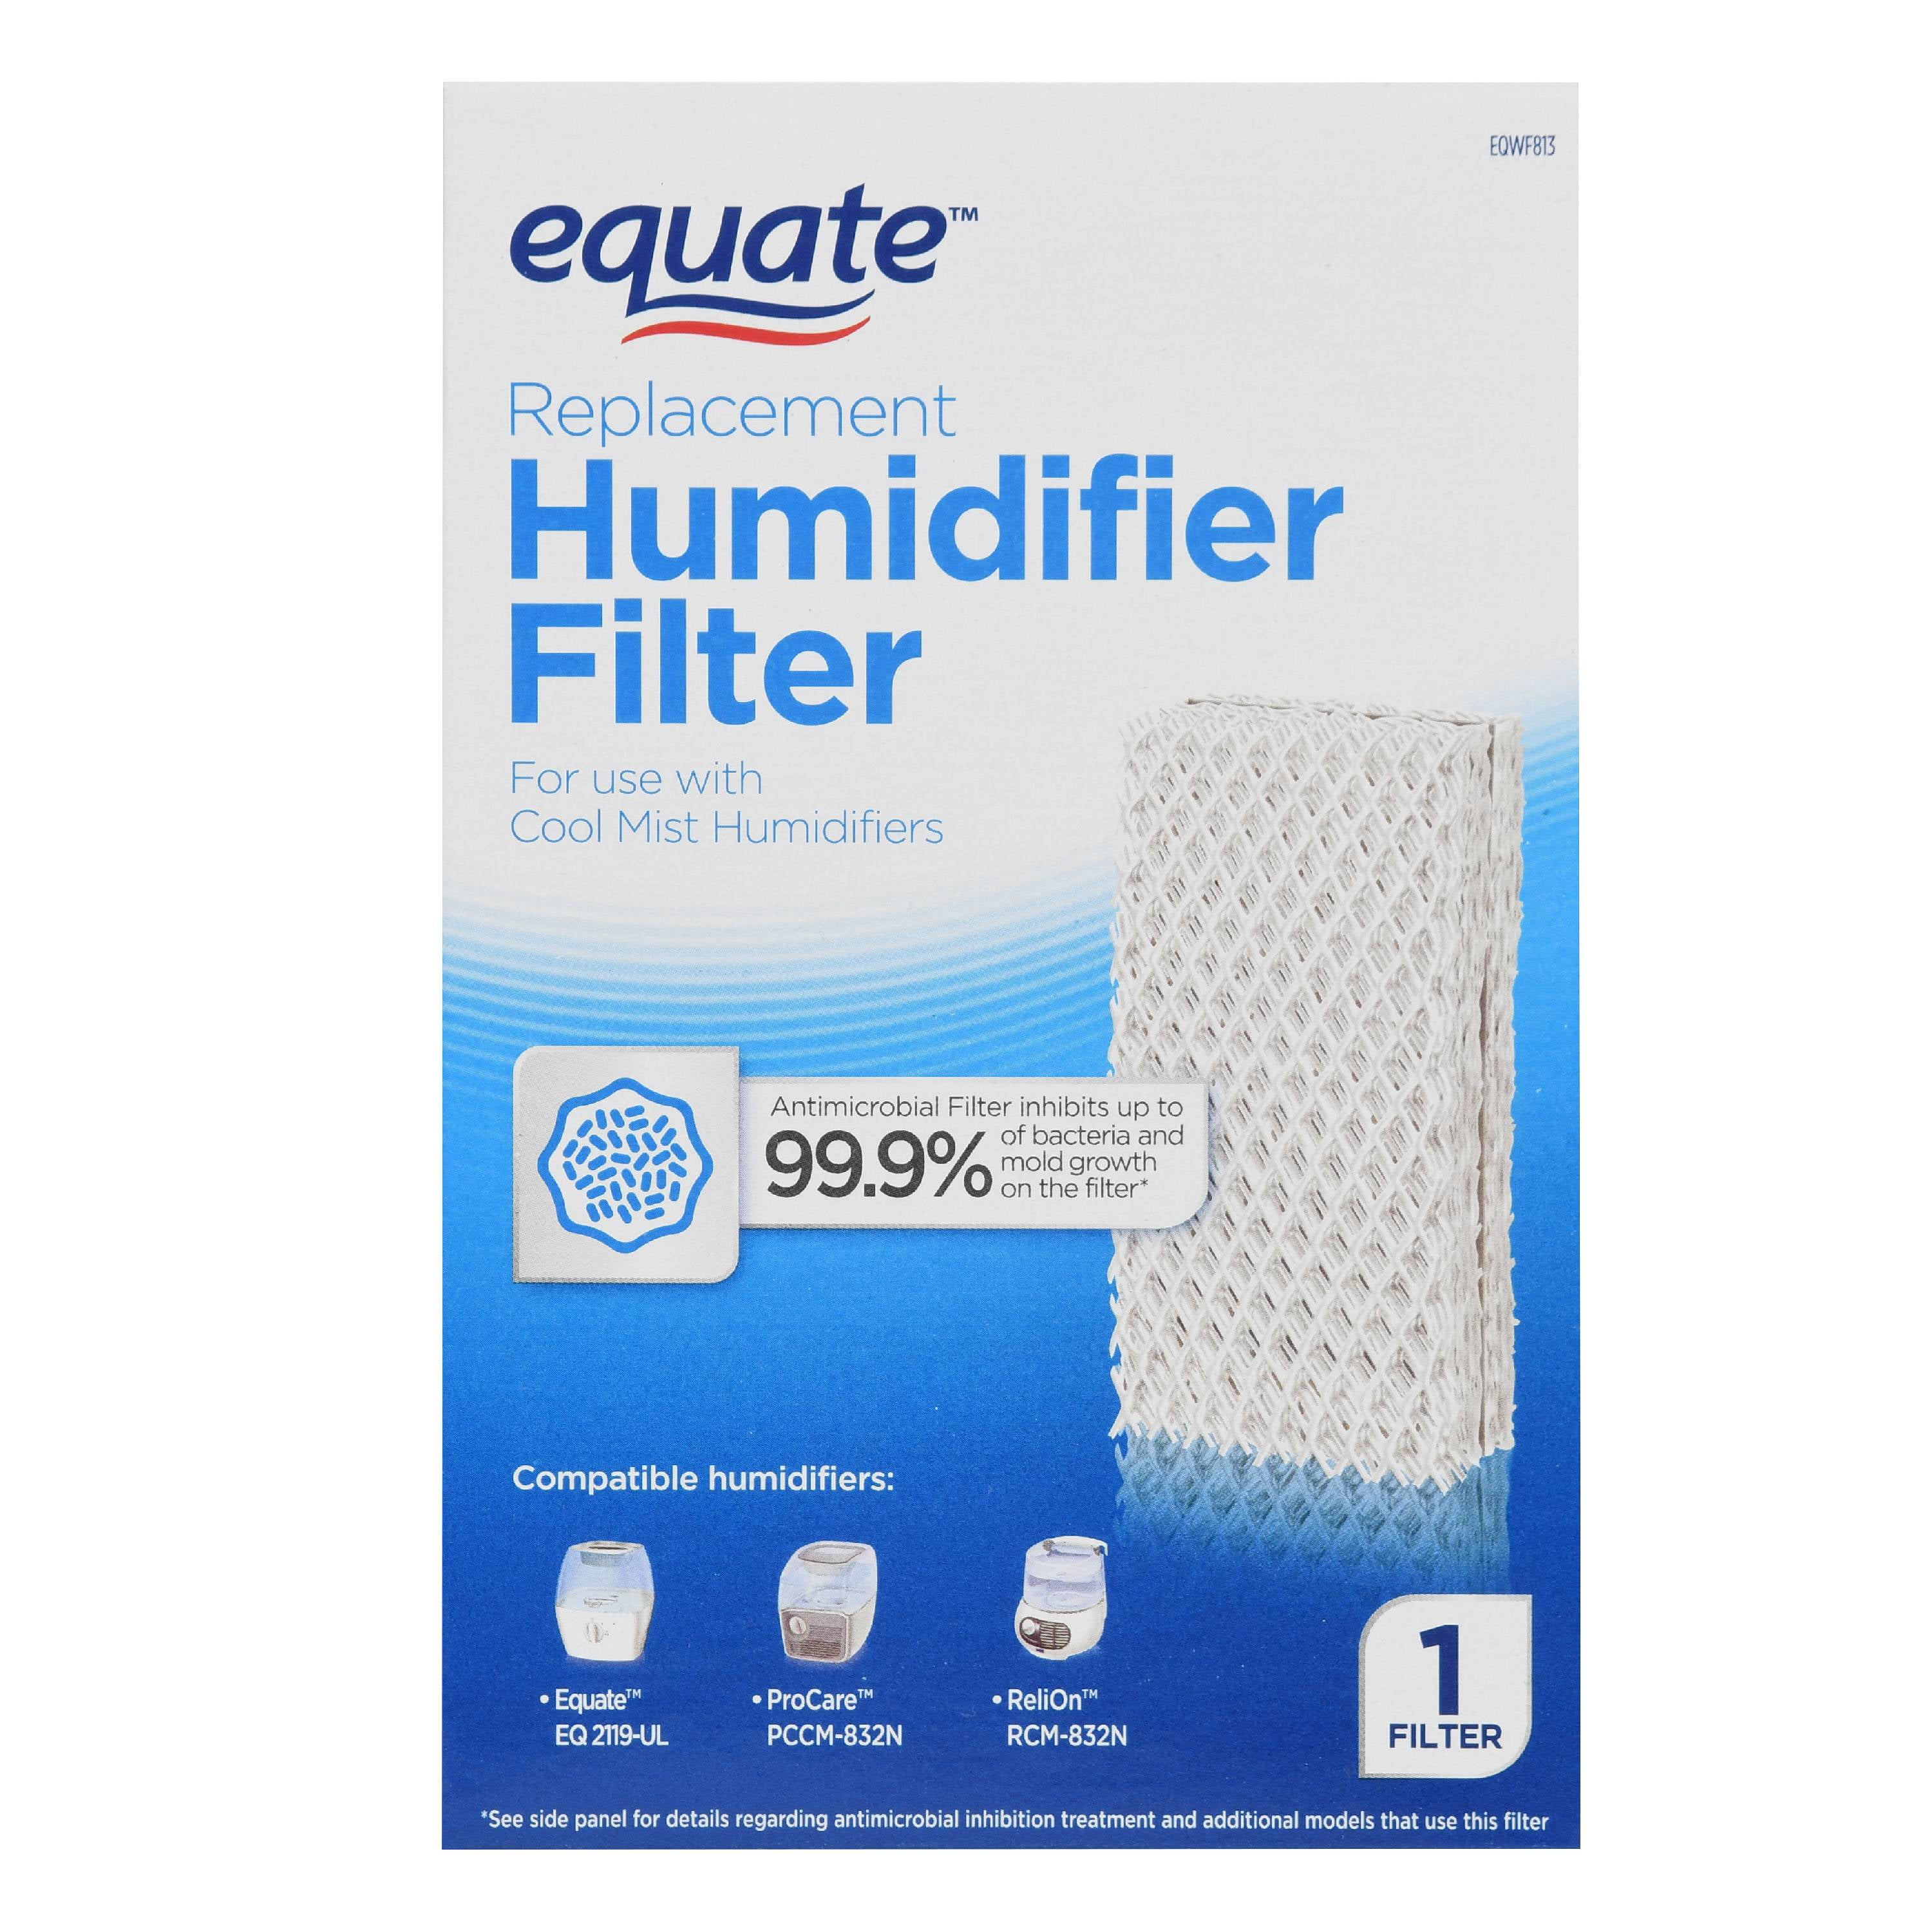 Equate Humidifier Filter Replacement - Walmart.com